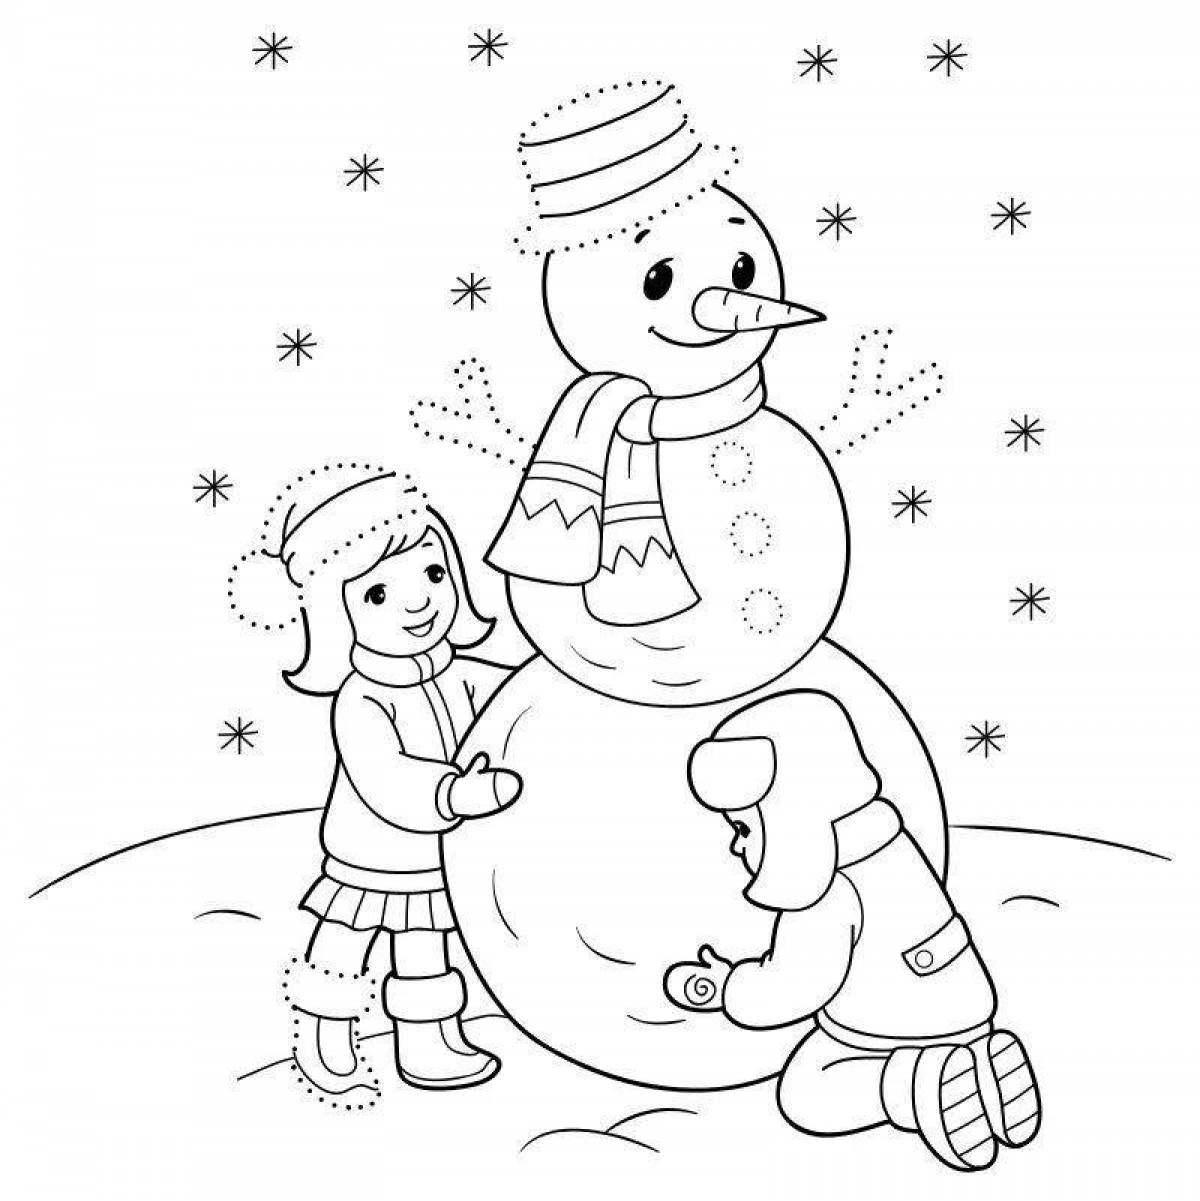 Sparkly winter fun coloring book for 2-3 year olds